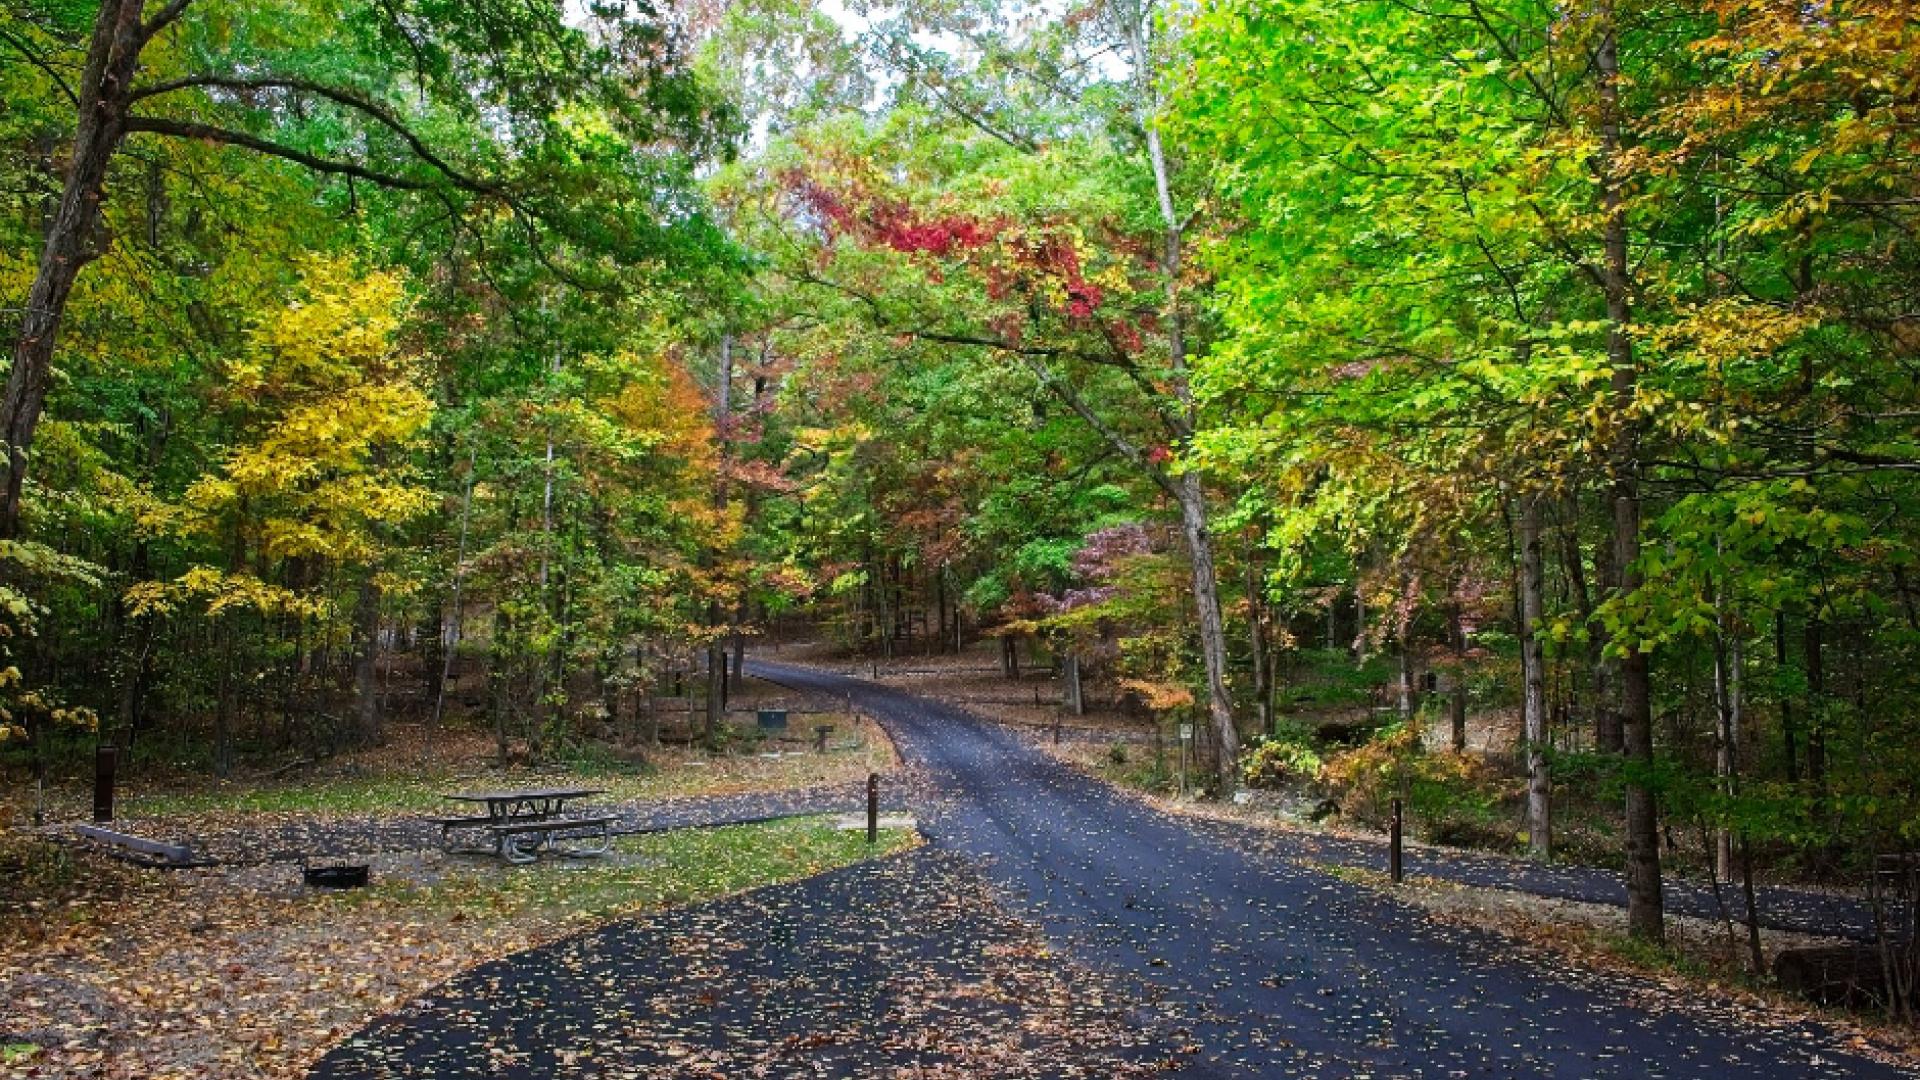 A campground road with individual sites visible surrounded by trees beginning to turn yellow, red, and orange for fall. Fallen leaves sprinkle the ground.